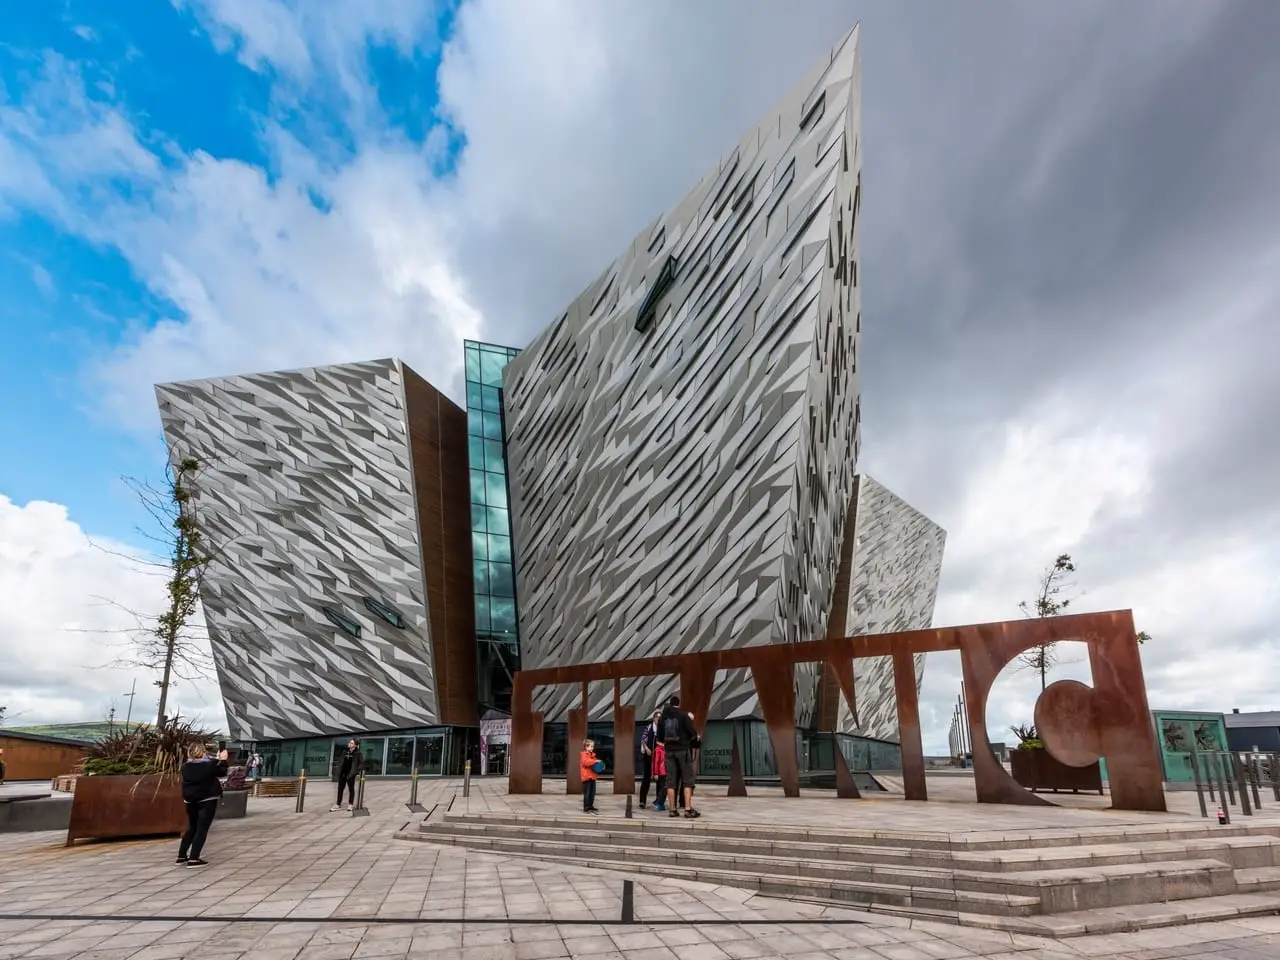 The Titanic Experience in Belfast Northern Ireland. This museum is one of the most complete Titanic exhibitions in the world.